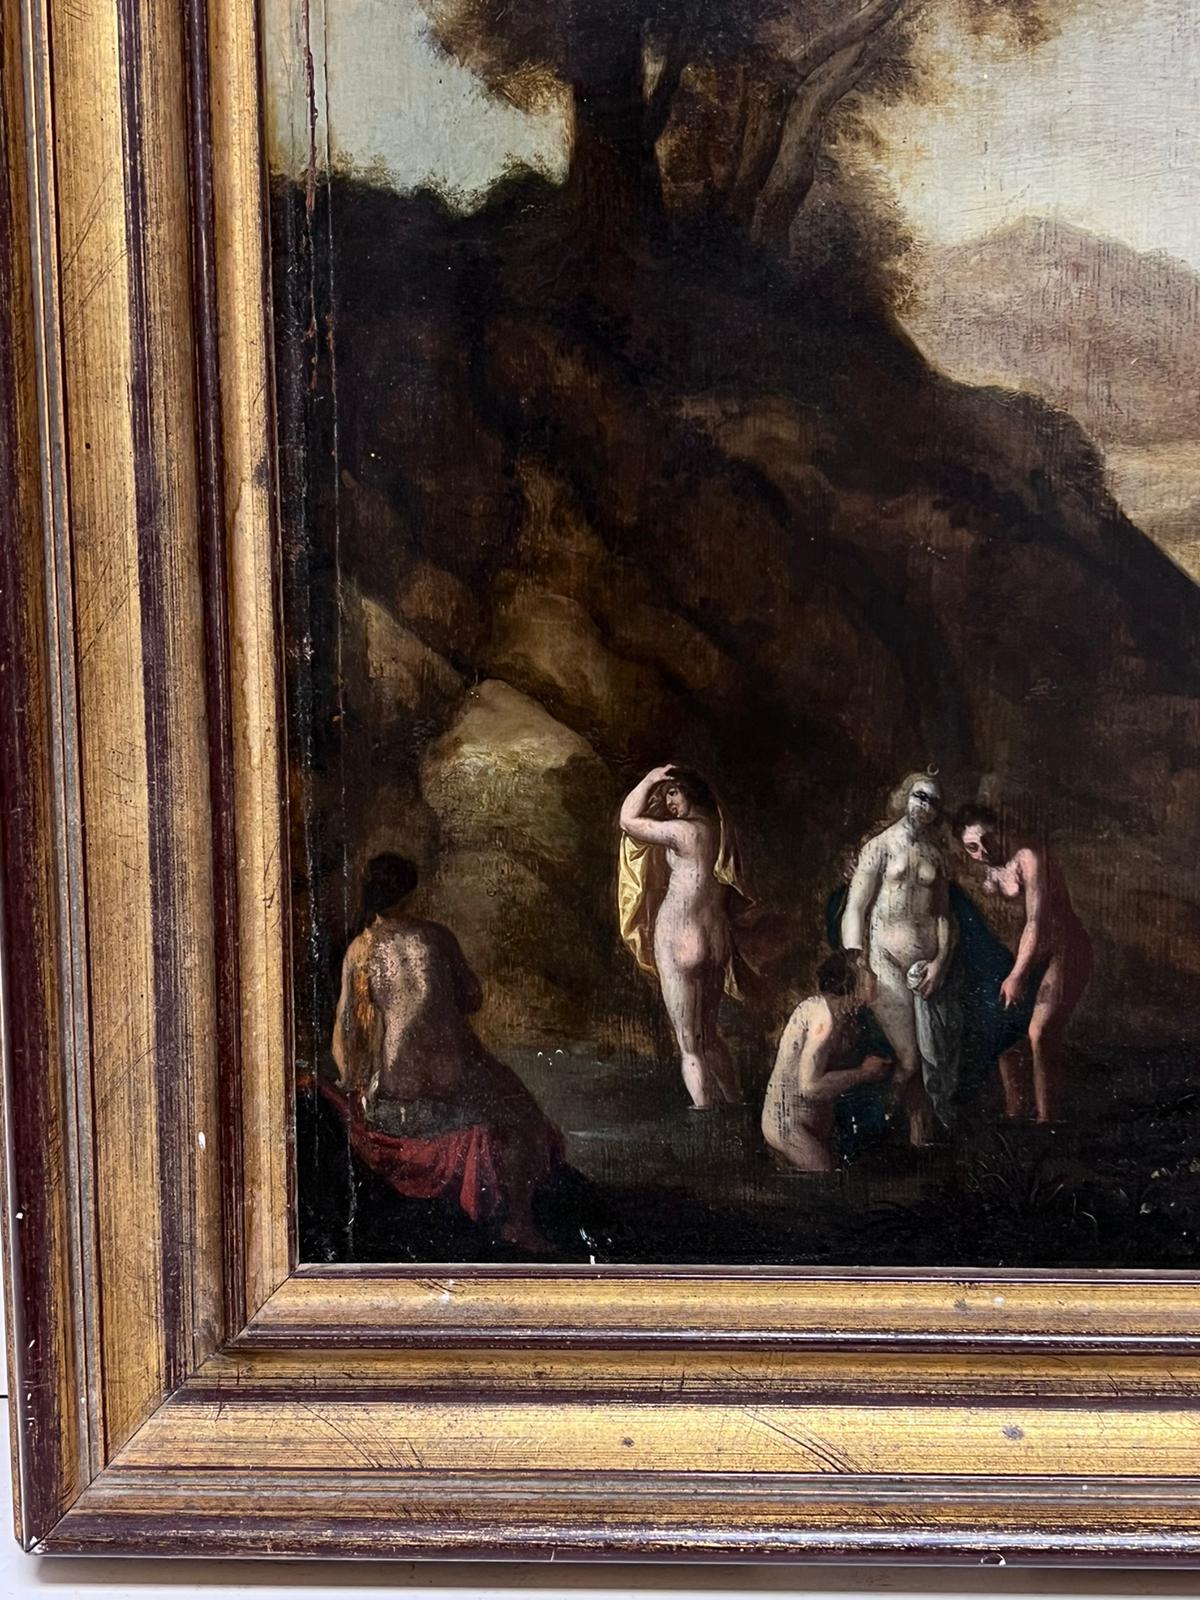 Nude Figures in Wooded Landscape
French School, 17th century
oil on wood panel, framed
framed: 25.5 x 21.5 inches
board: 20 x 15.5 inches
provenance: private collection, France
condition: very good and sound condition though with obvious age related